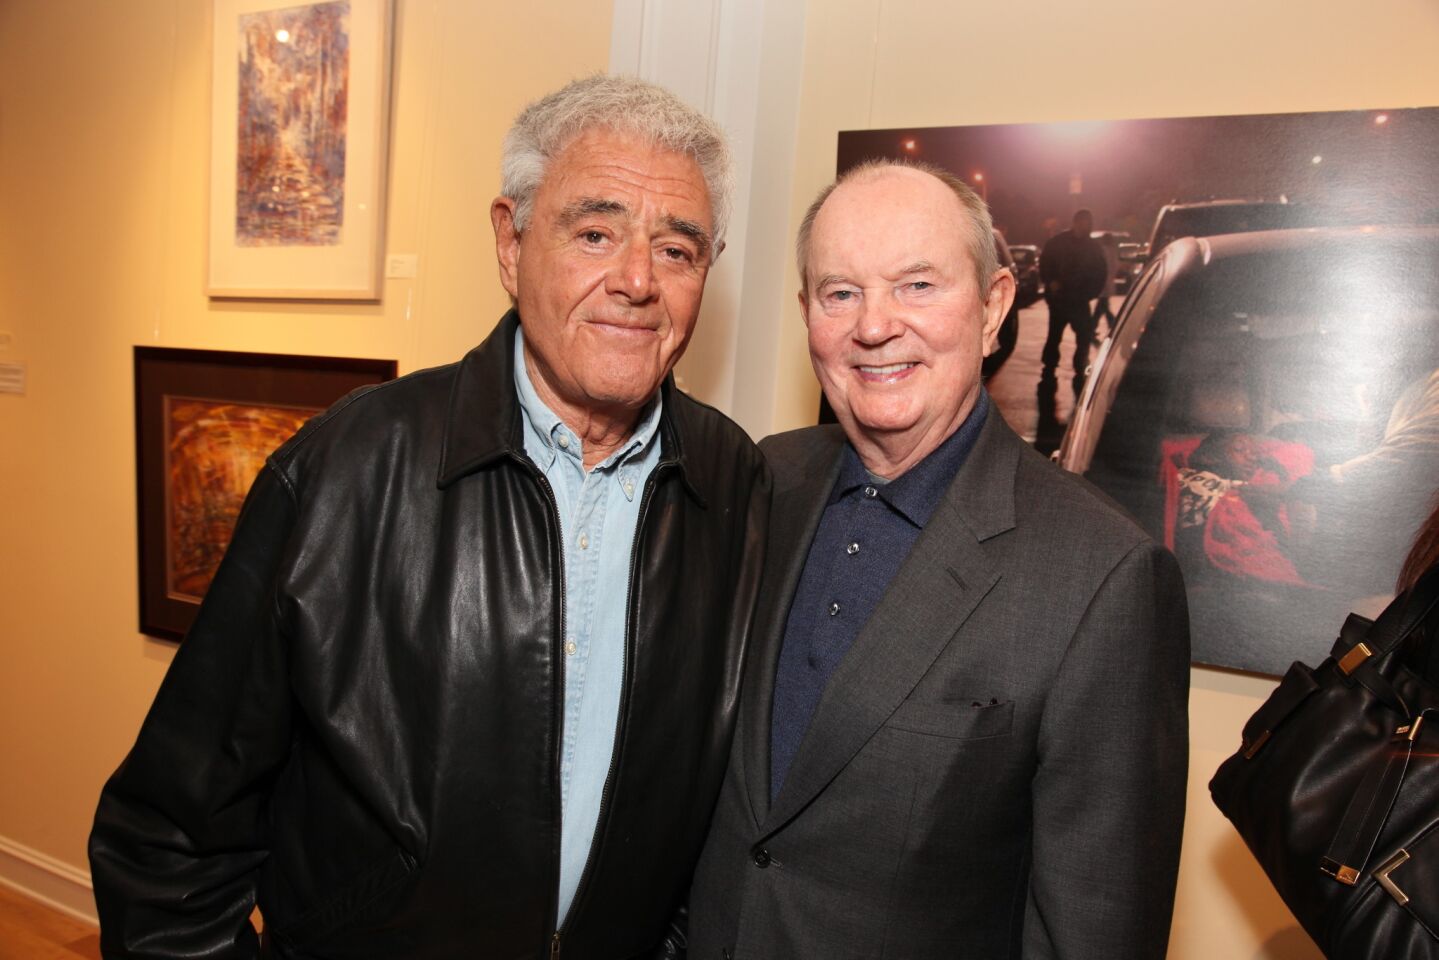 Richard Donner, left, and Jerry Perenchio at a reception at the Art House in L.A. in 2010.